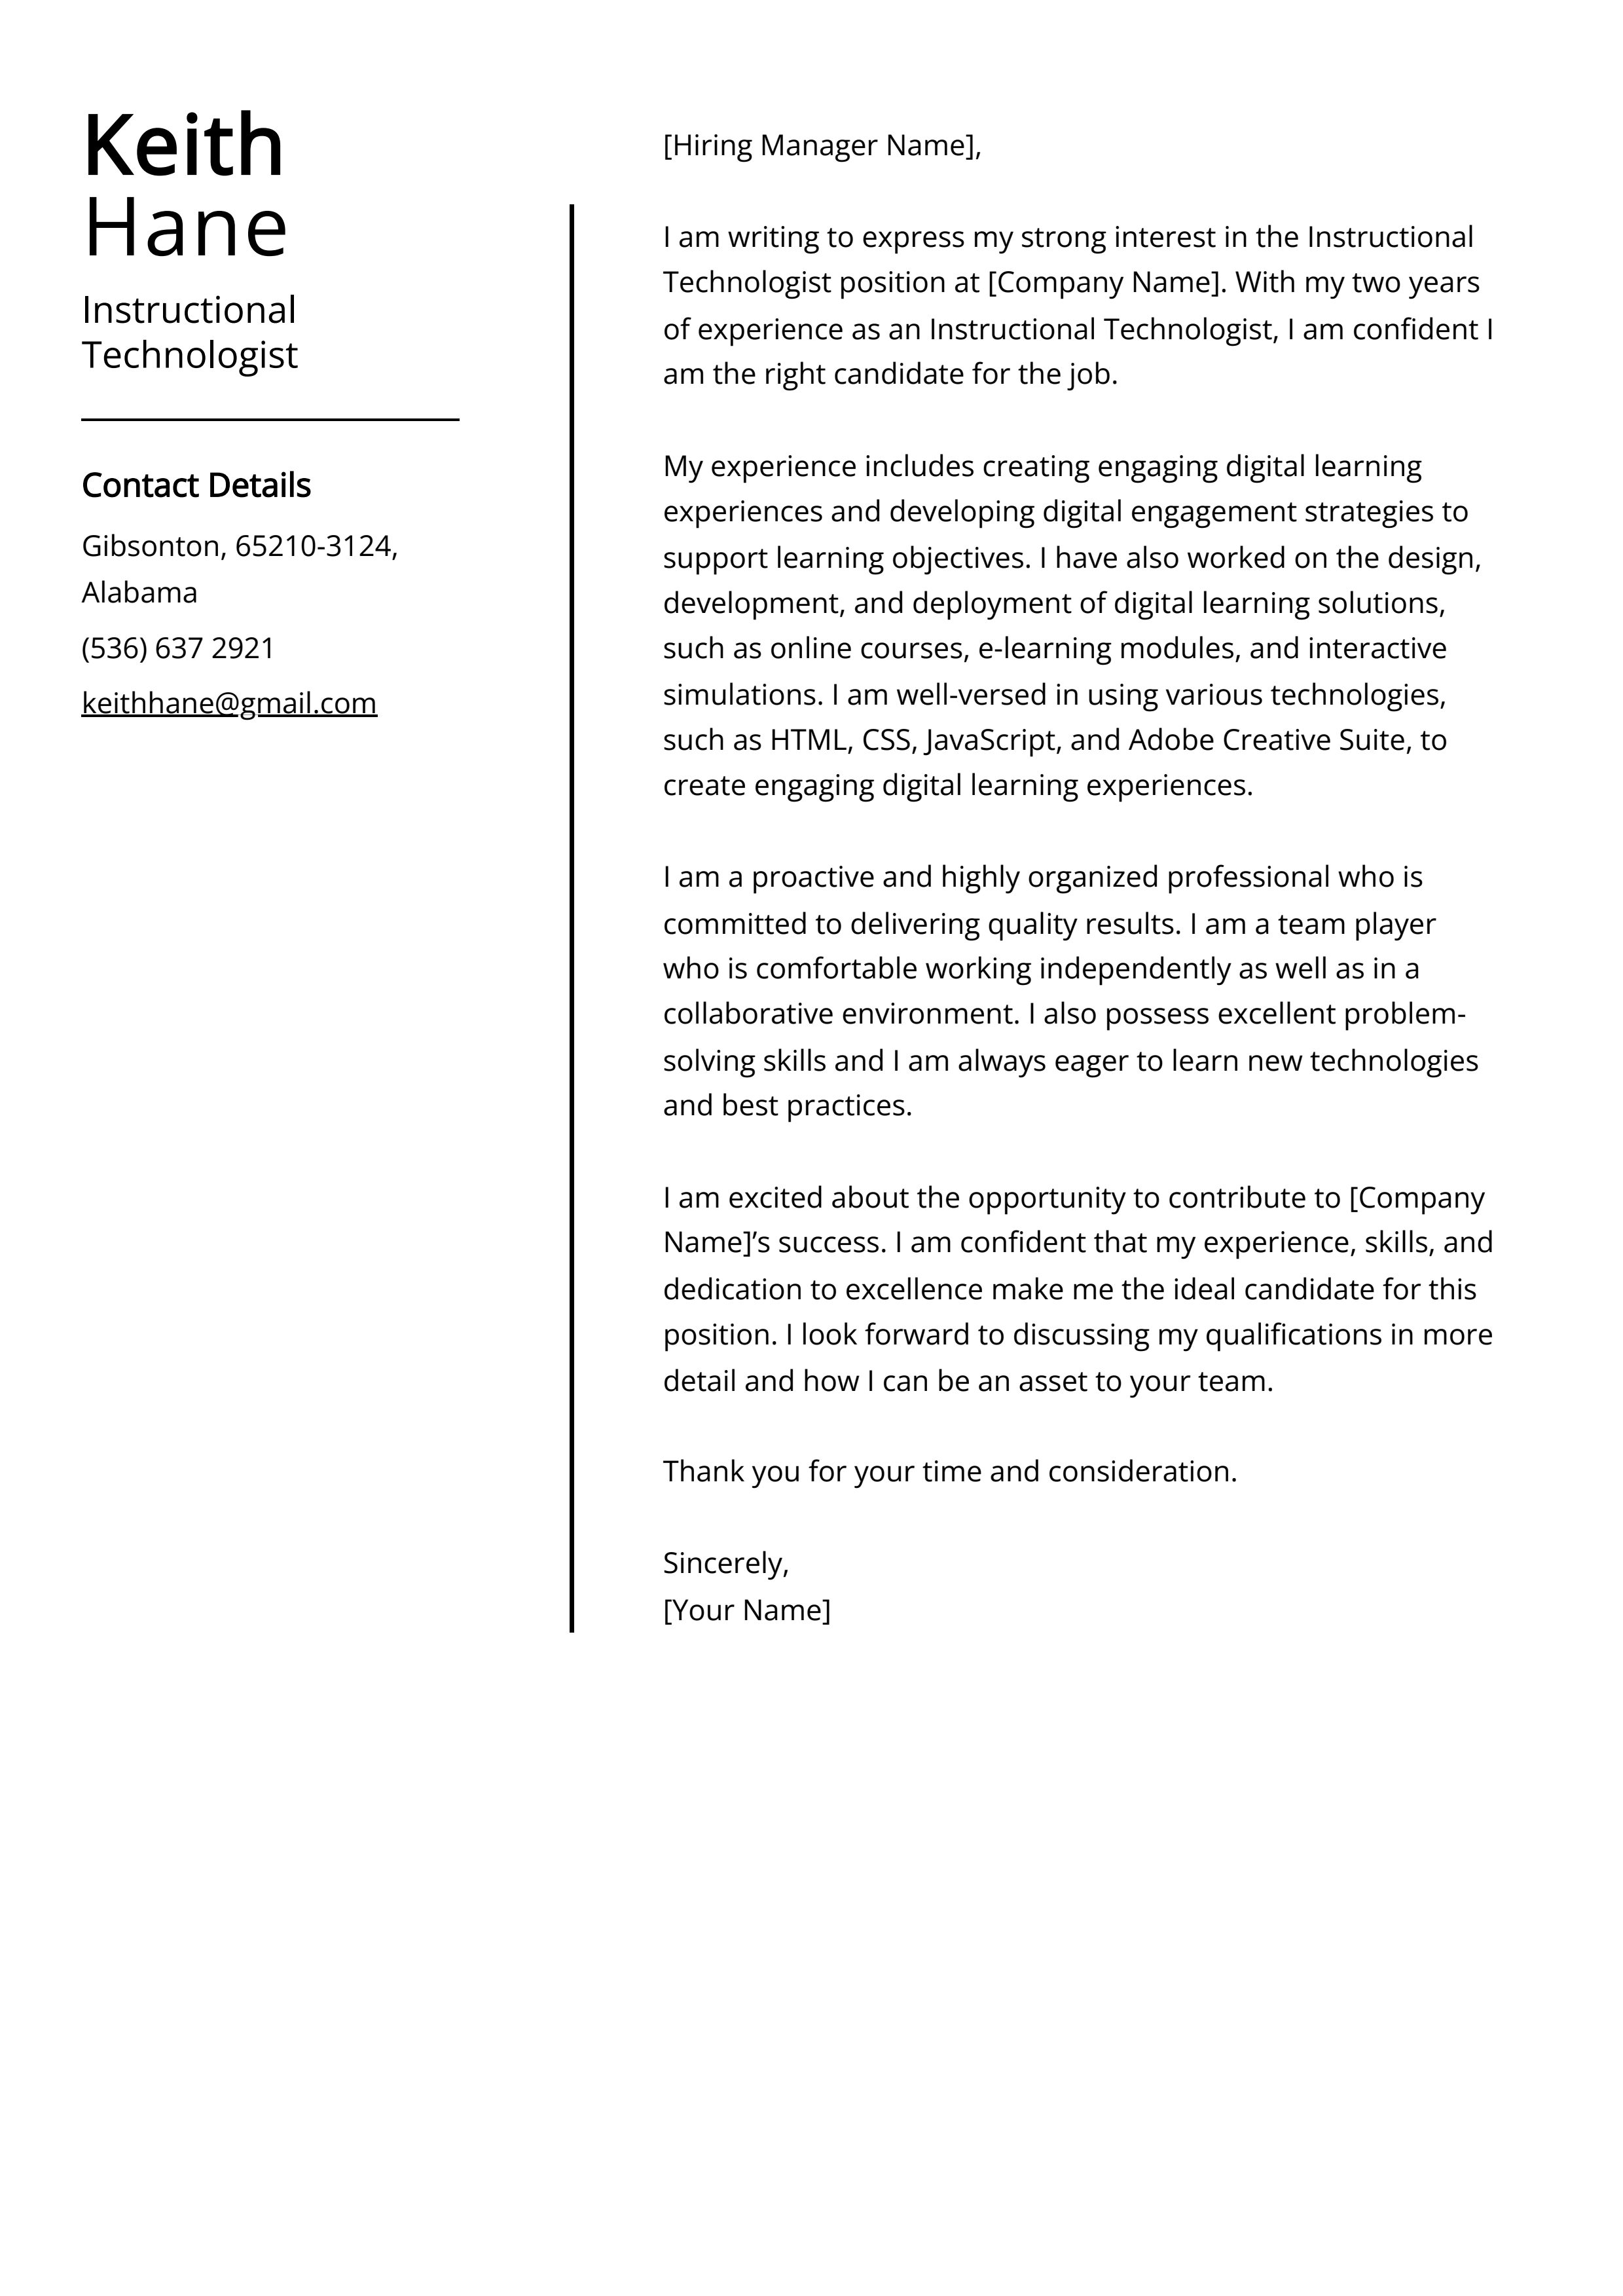 Instructional Technologist Cover Letter Example